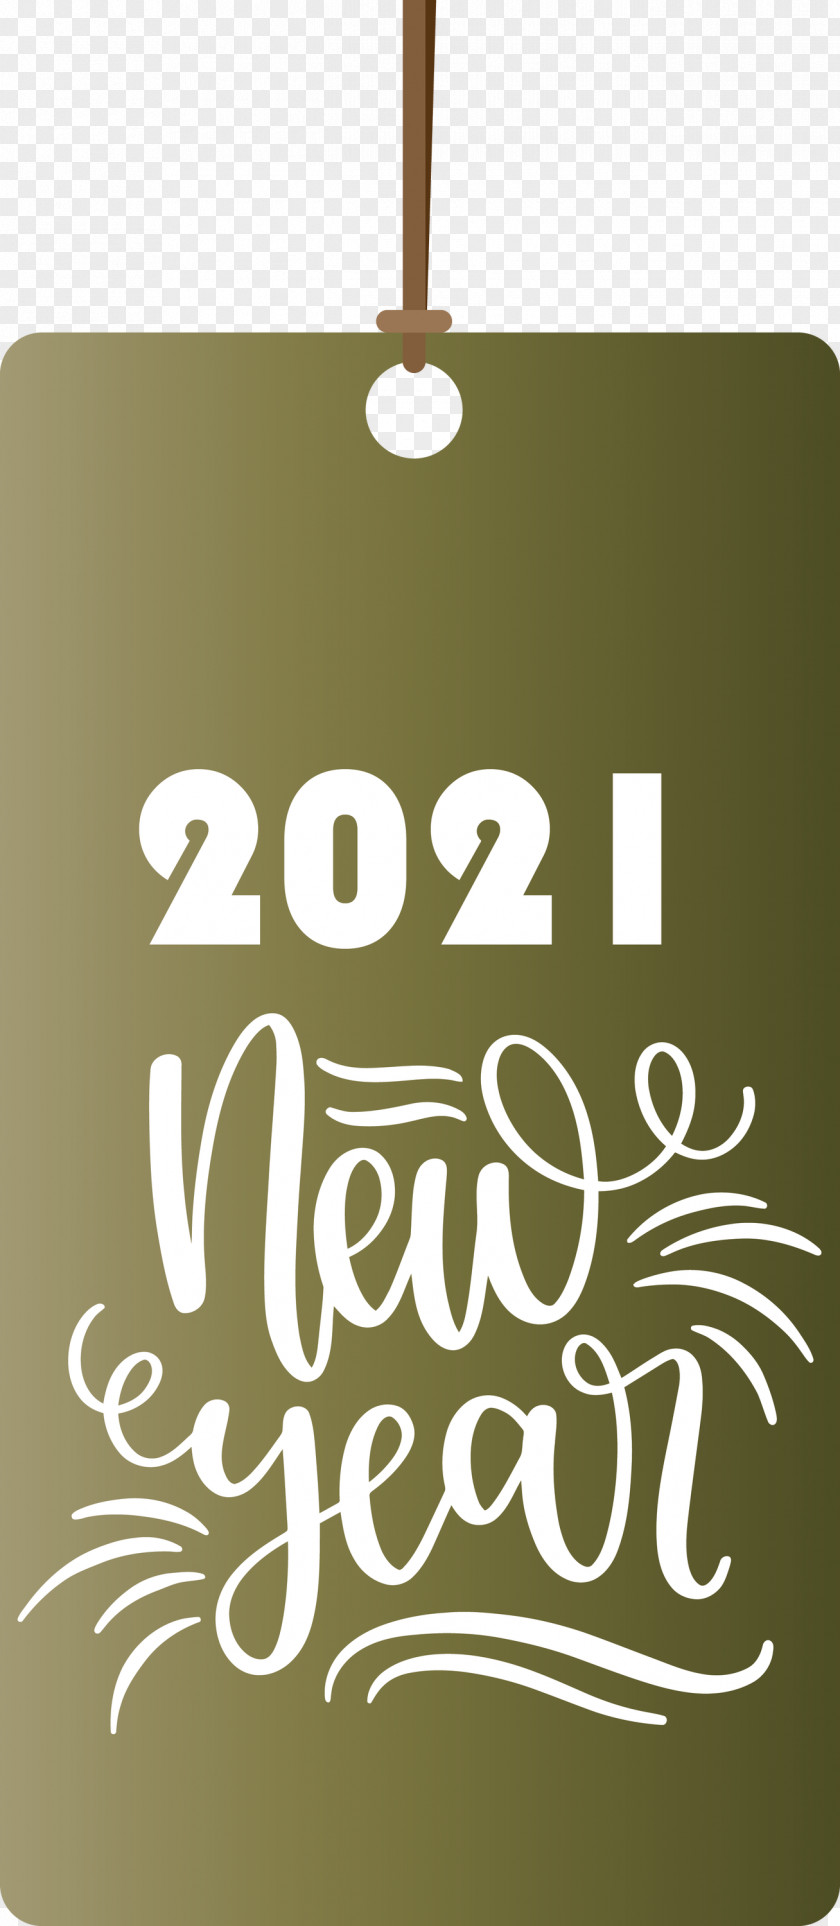 2021 Happy New Year Tag PNG